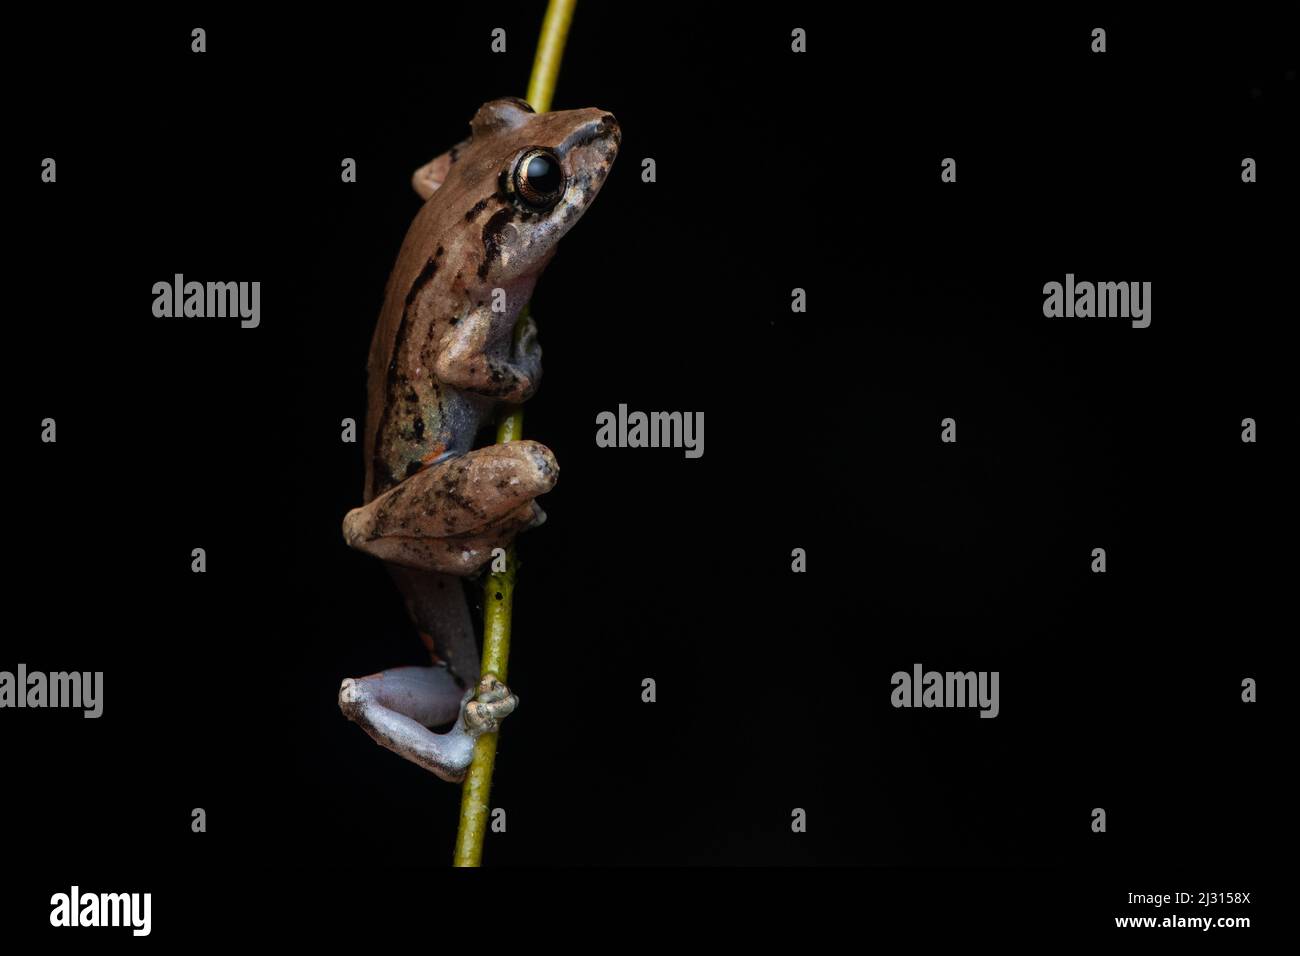 A rainfrog in the genus Pristimantis climbs a vine - frog infront of a black background. In Ecuador. Stock Photo